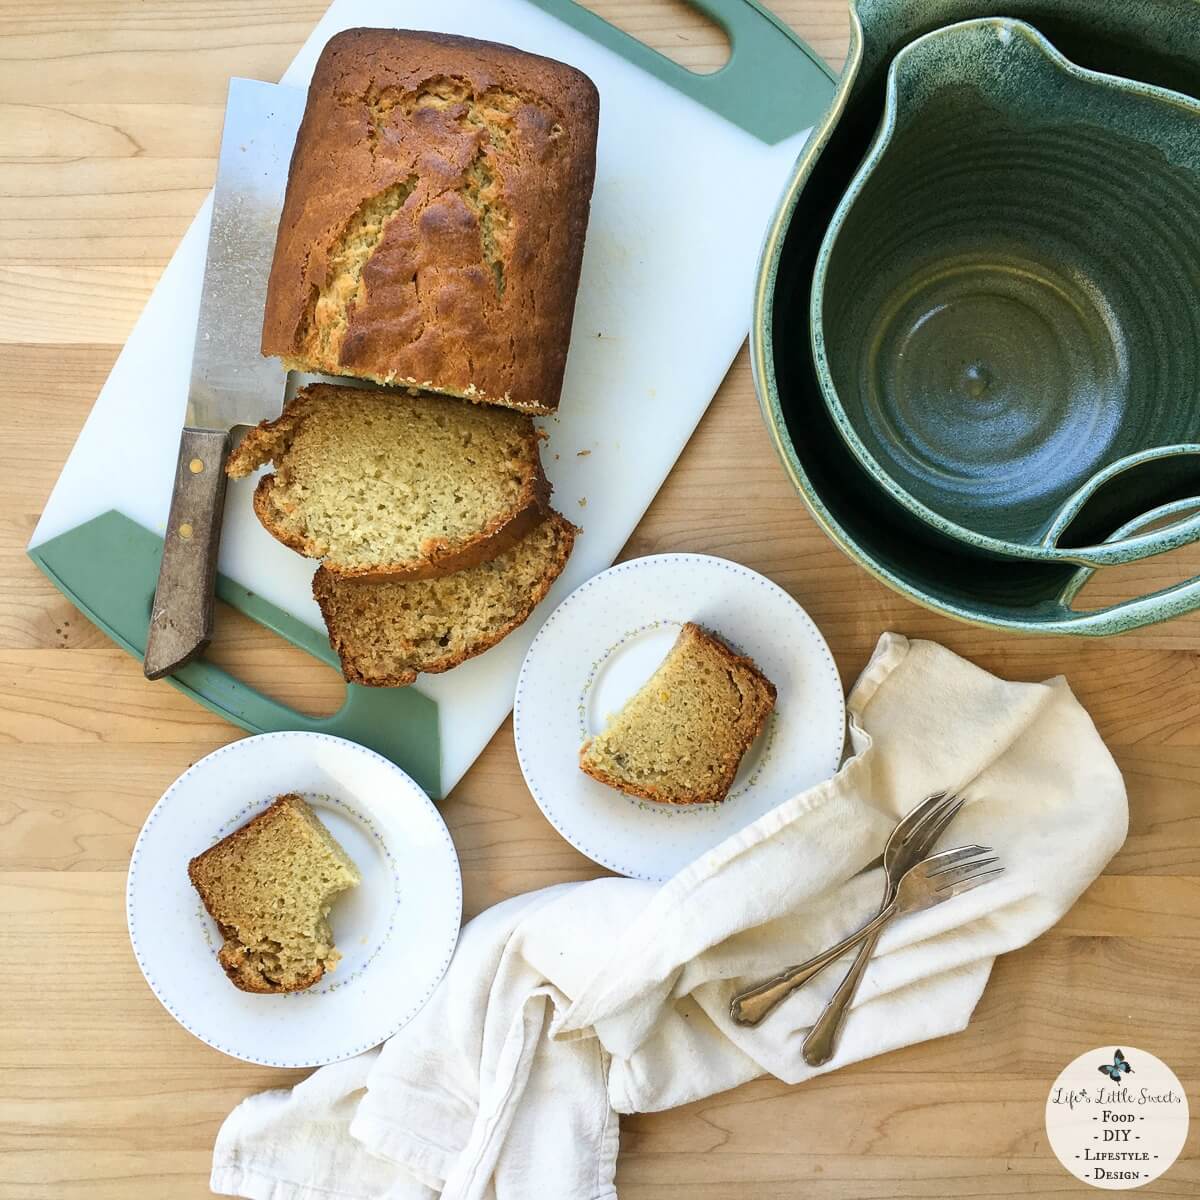 Easy Banana Bread + Nesting Stoneware Mixing Bowls from Uncommon Goods Review - Easy Banana Bread is a traditional banana bread and perfect for breakfast, snack or dessert. Check out my review of the Nesting Stoneware Mixing Bowls that I used to make this banana bread from Uncommon Goods!